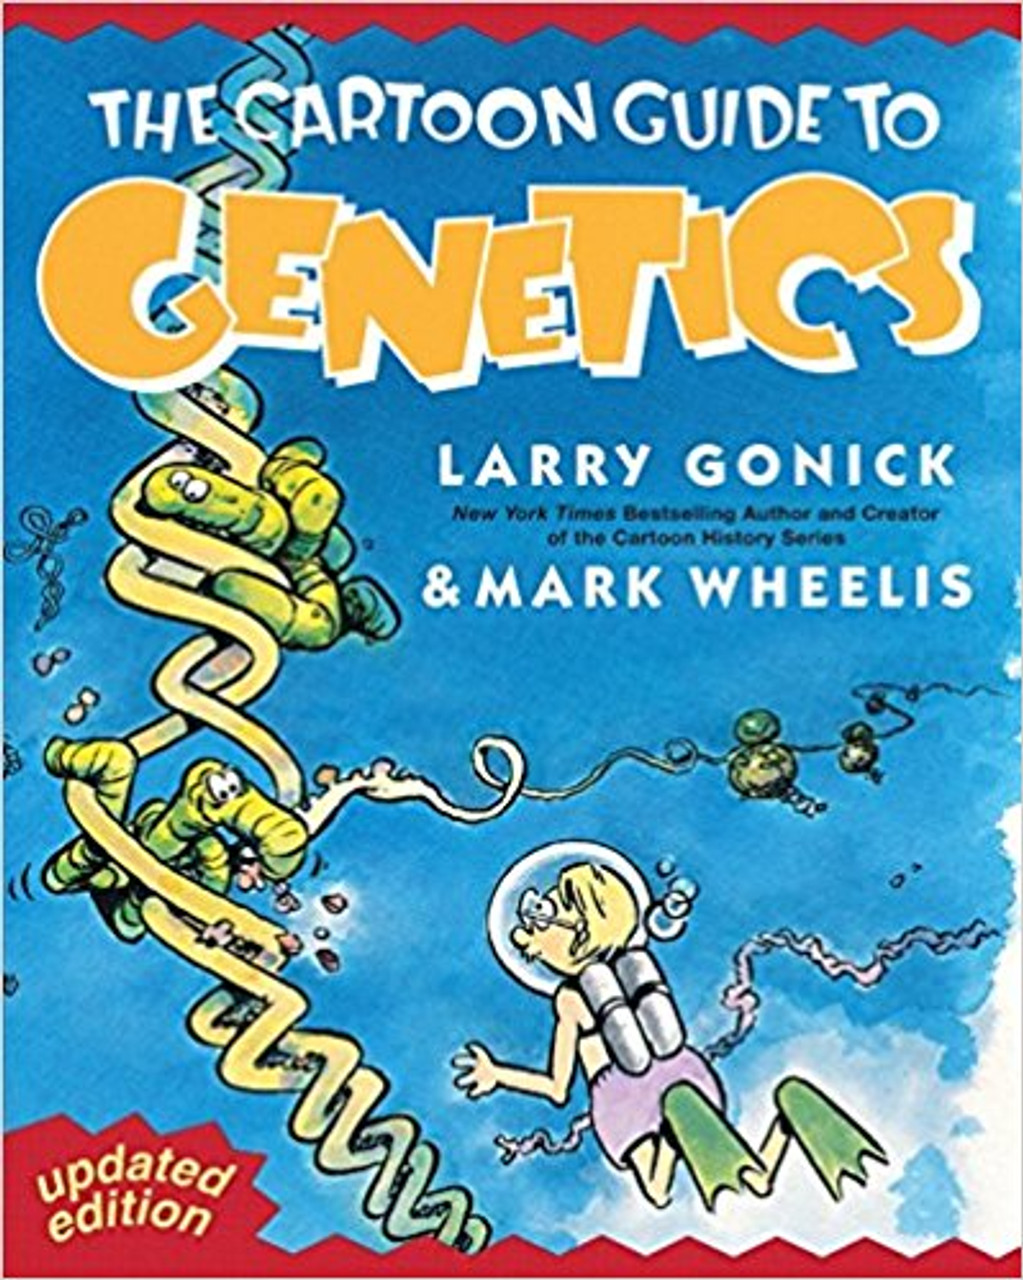 The Cartoon Guide to Genetics by Larry Gonick